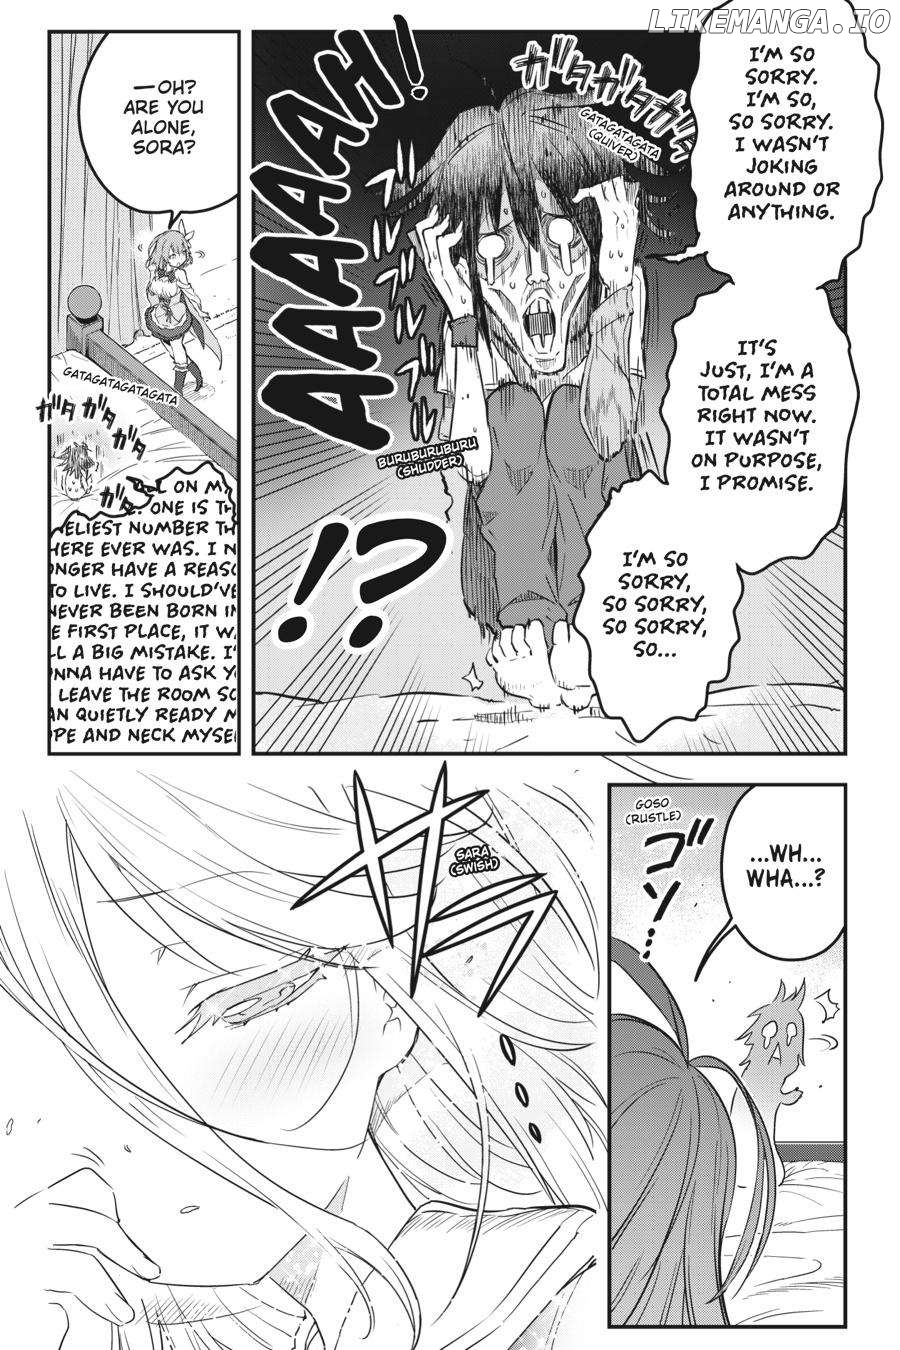 No Game No Life Chapter 2 - Eastern Union Arc Chapter 1 - page 13